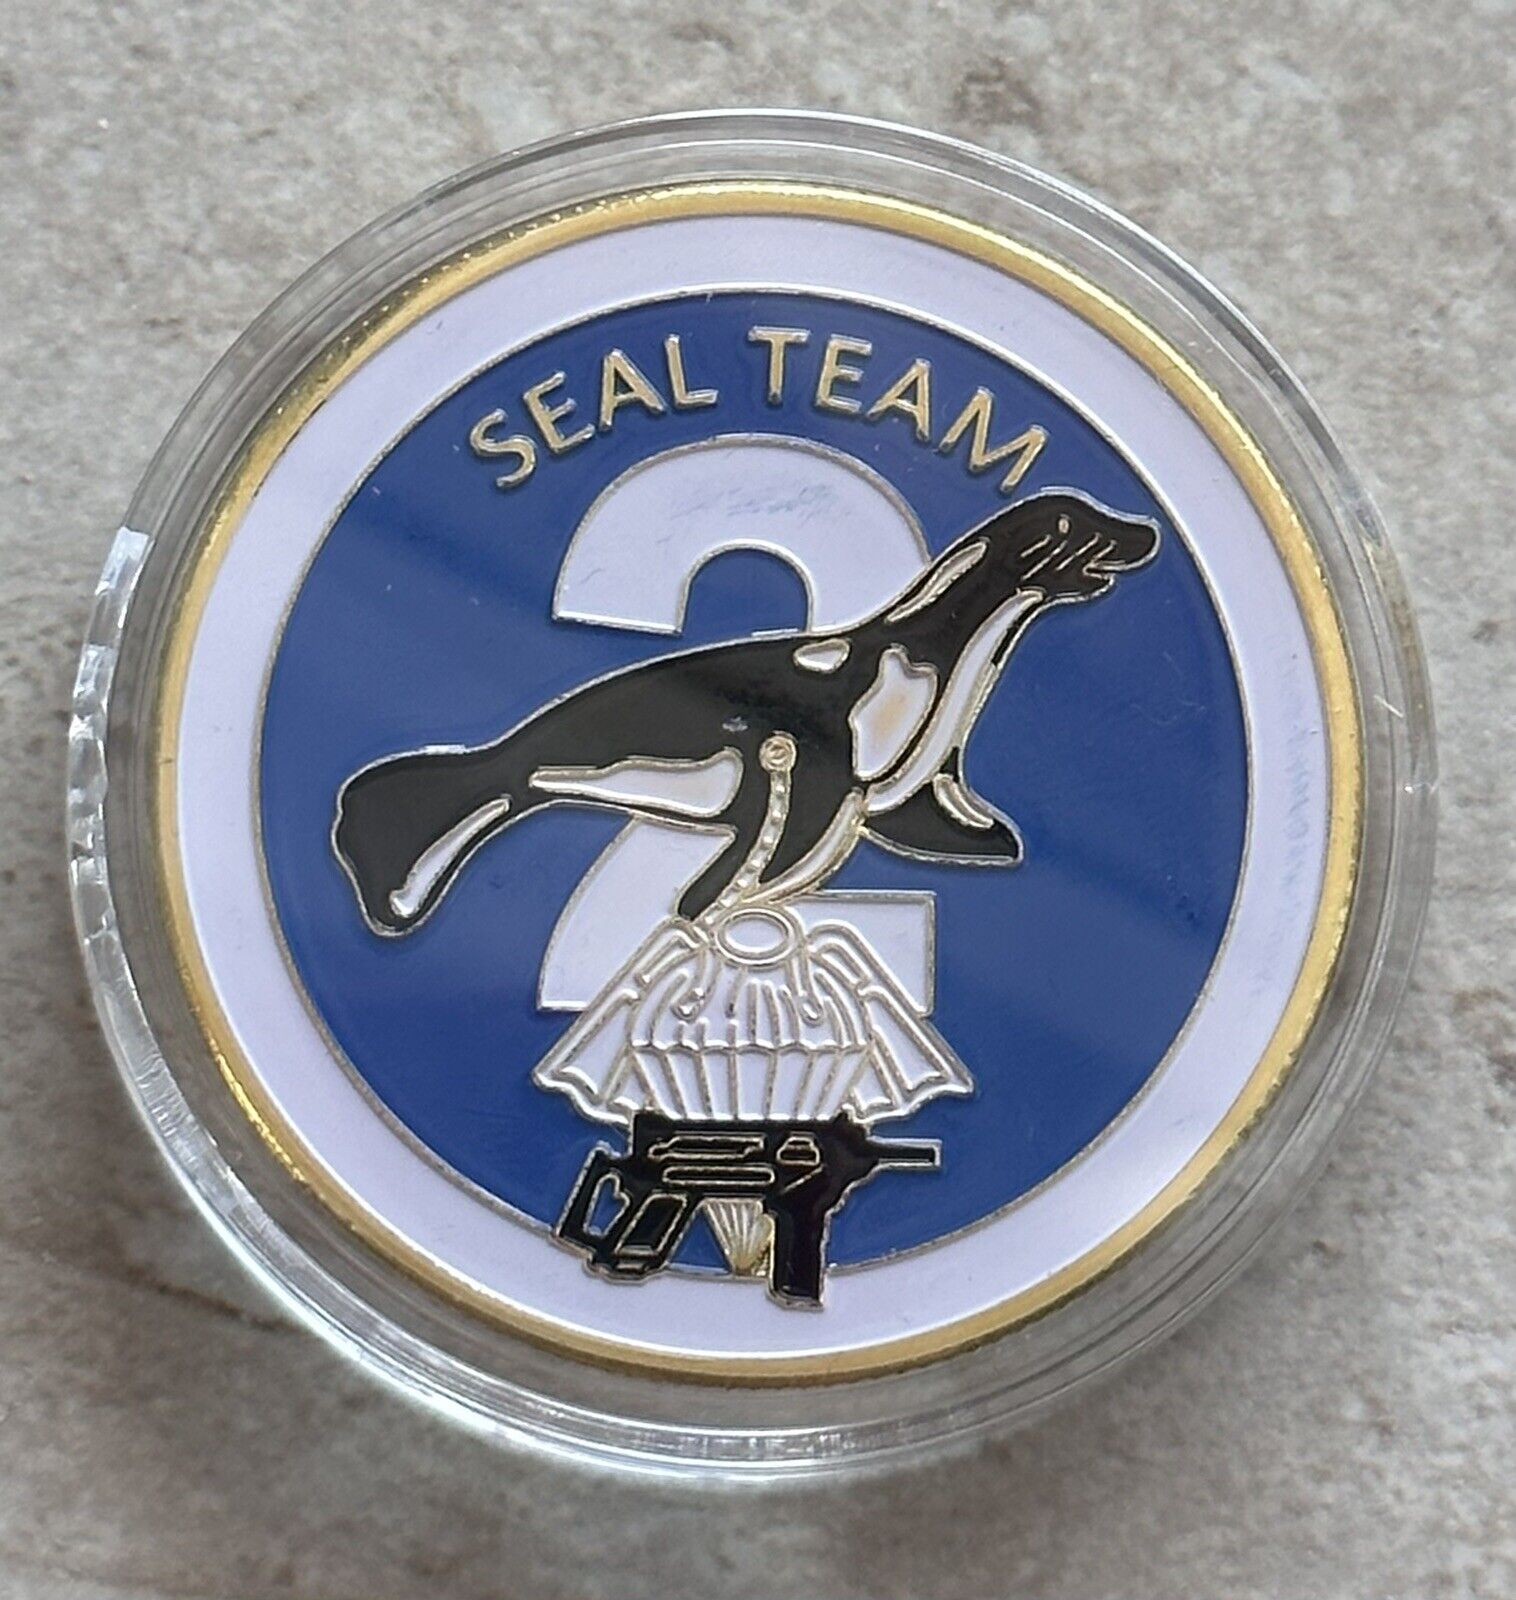 US Navy SEAL Team Two Naval Special Warfare Command NSW SOCOM Challenge Coin USN